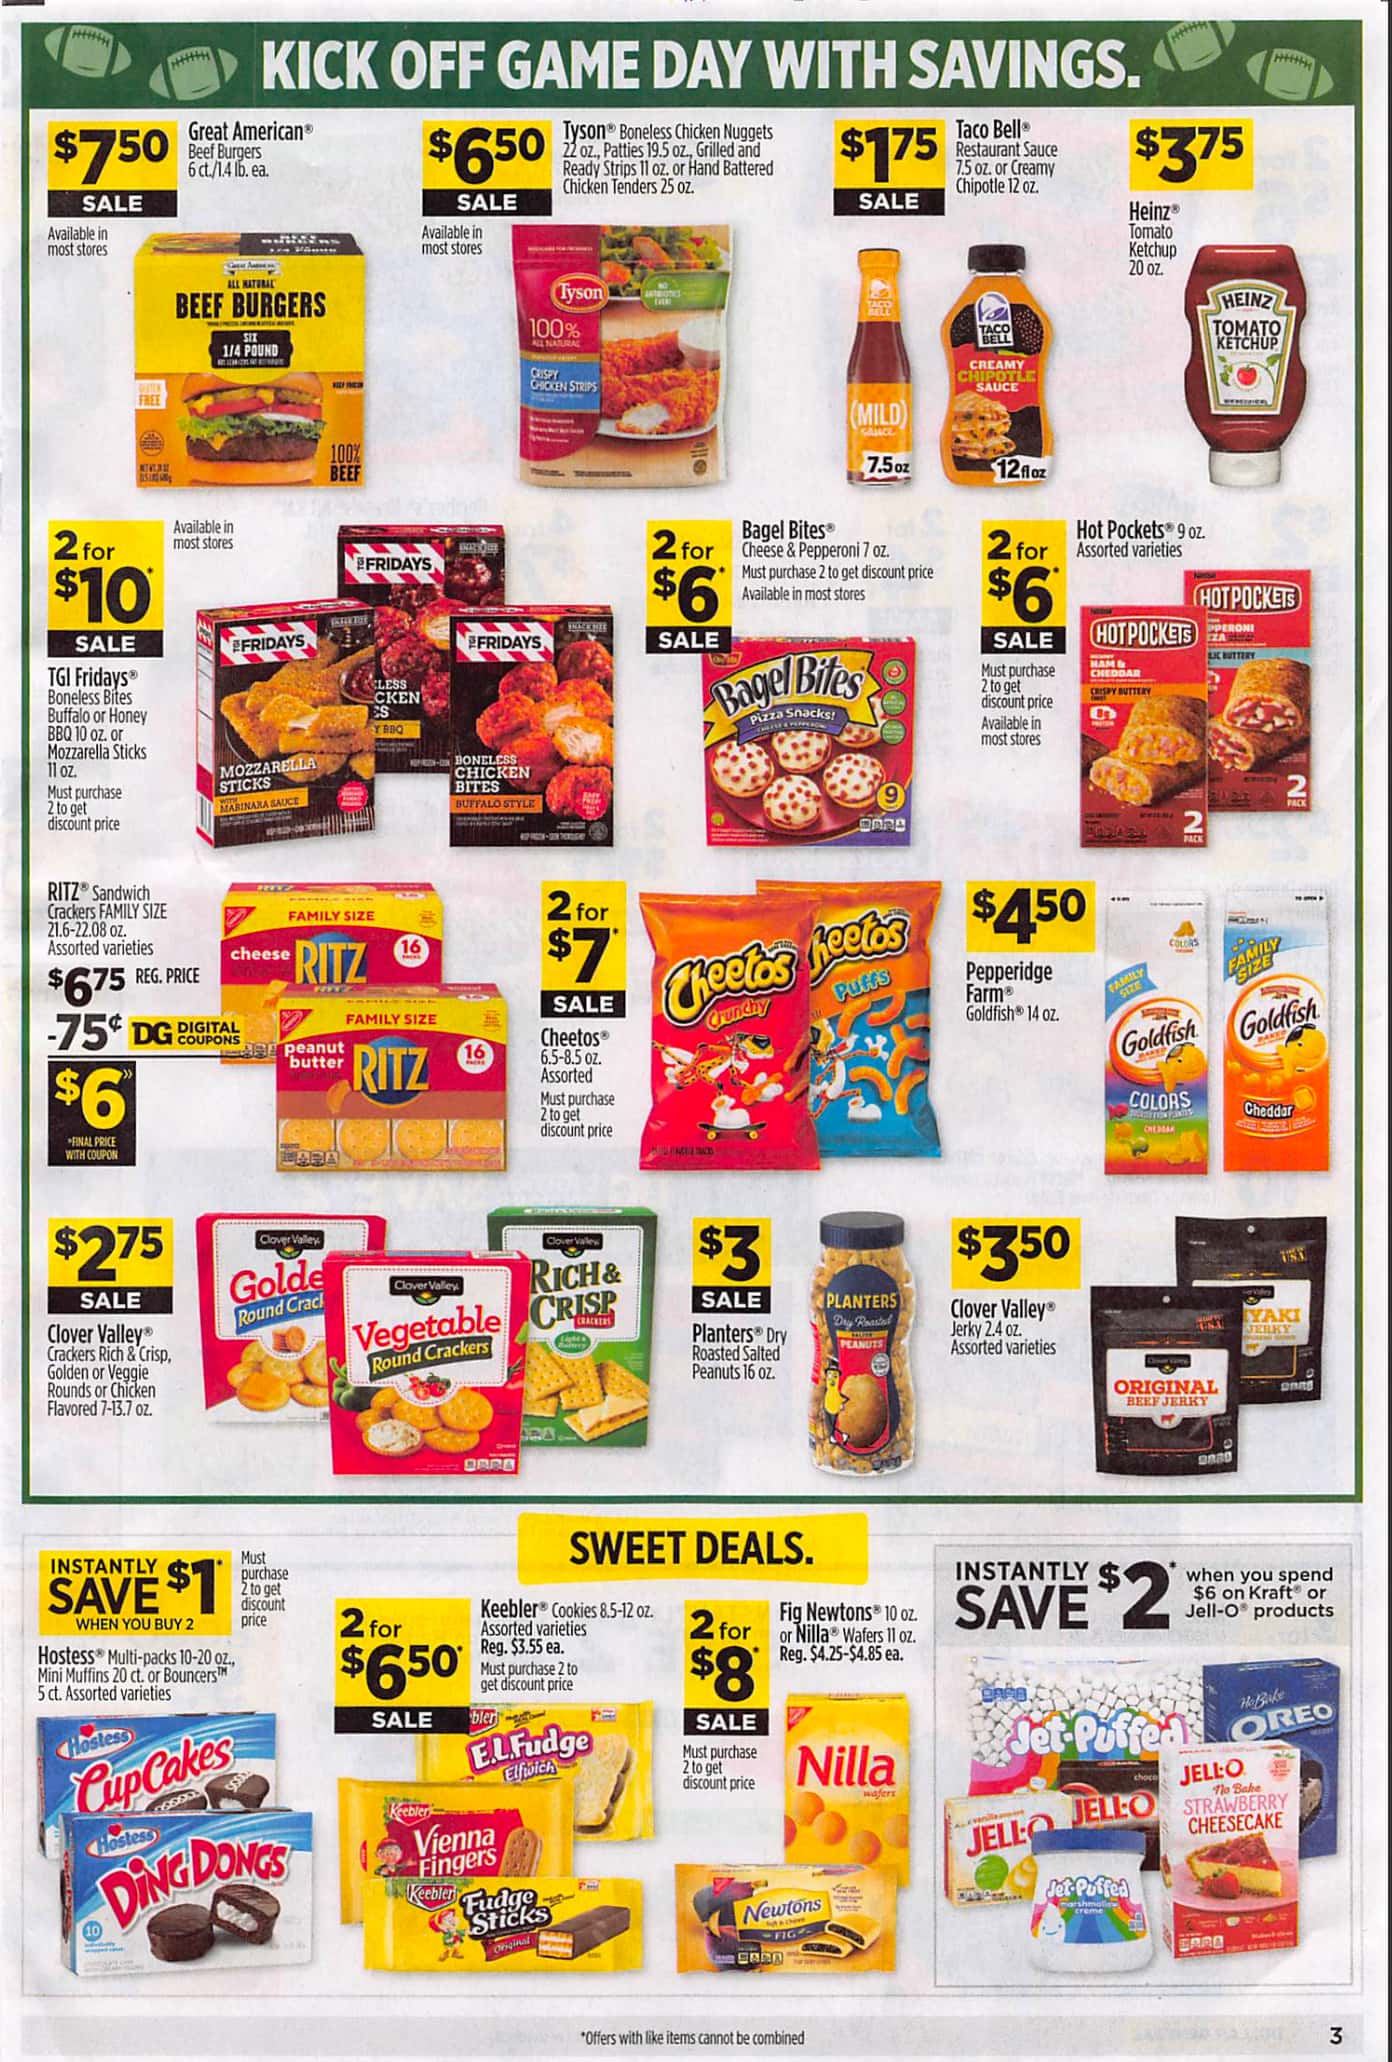 Dollar General ad for this week Preview valid for October 1 - 7, 2023